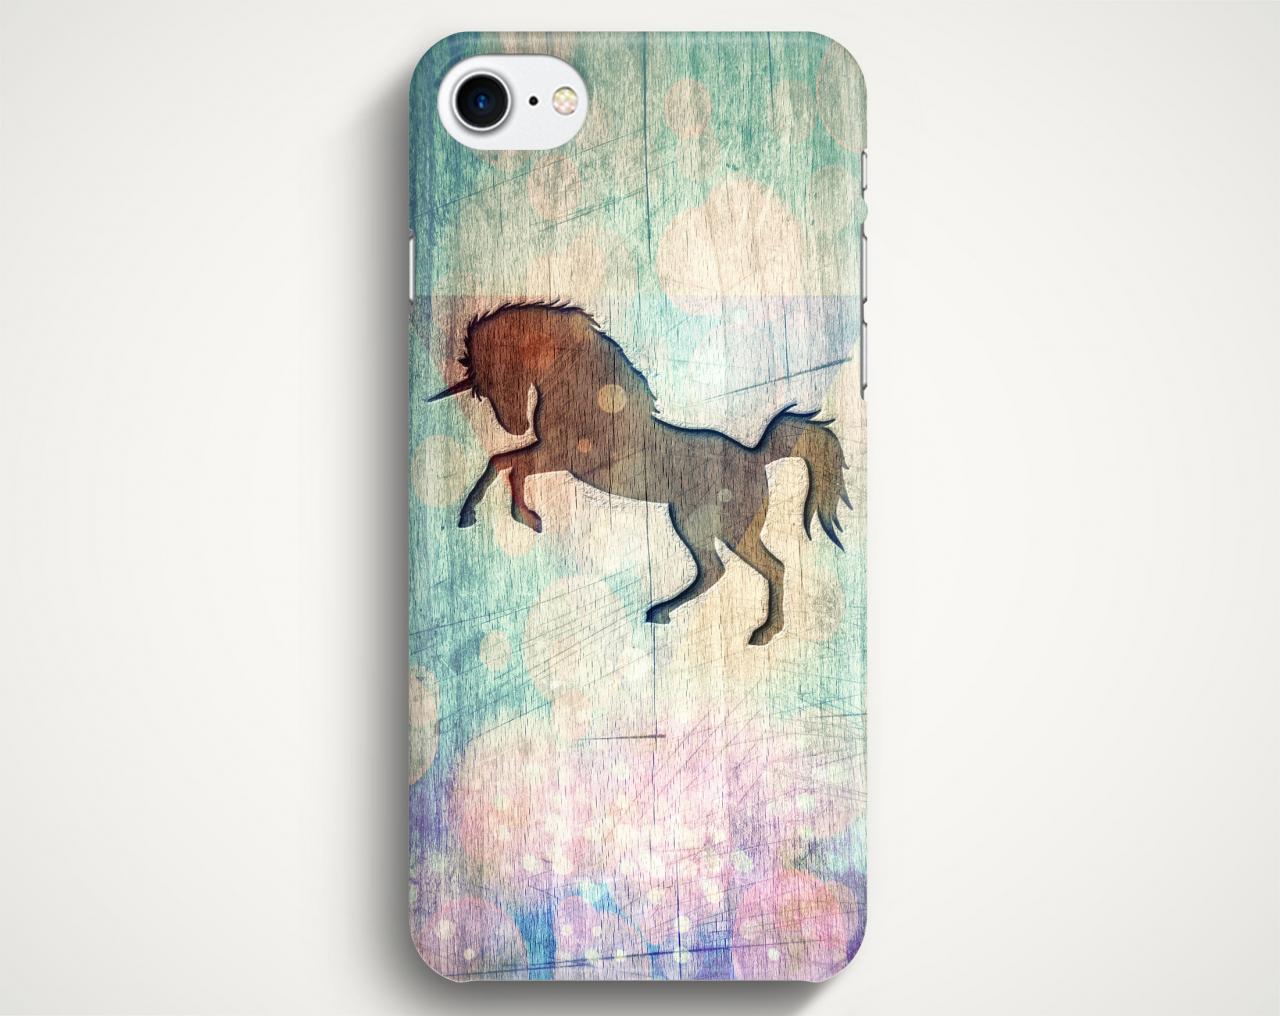 Unicorn Wood Texture Case For Iphone 7 Iphone 7 Plus Samsung Galaxy S8 Galaxy S7 Galaxy A3 Galaxy A5 Galaxy A7 Lg G6 Lg G5 Htc 10